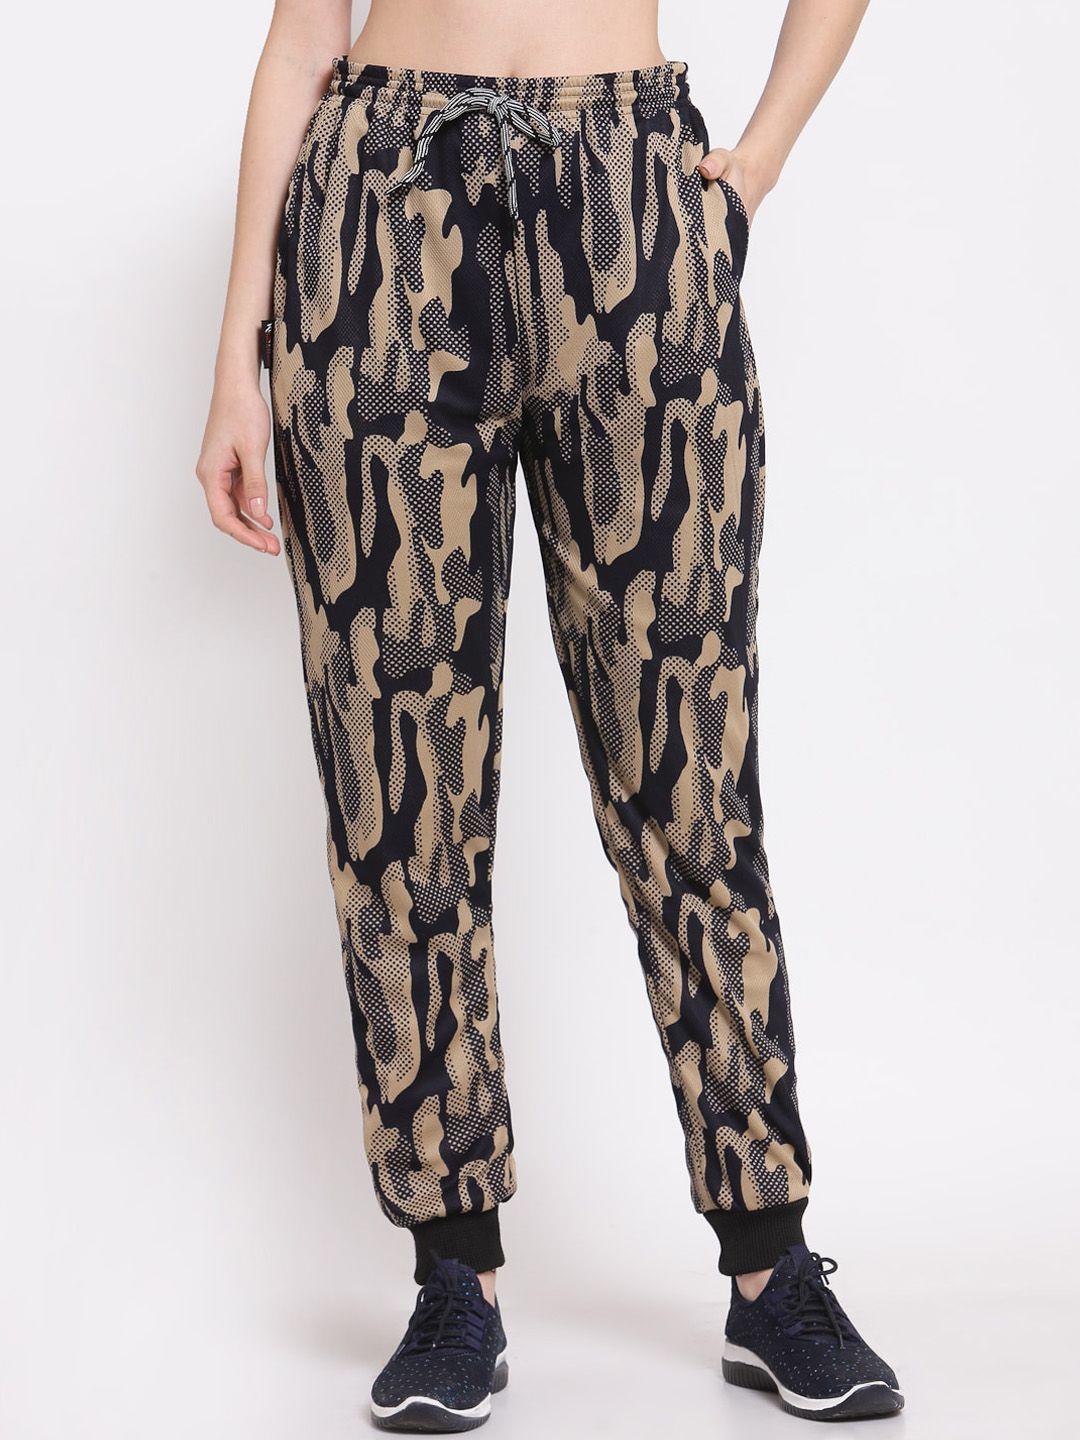 klotthe women beige & black camouflage joggers with rapid dry technology